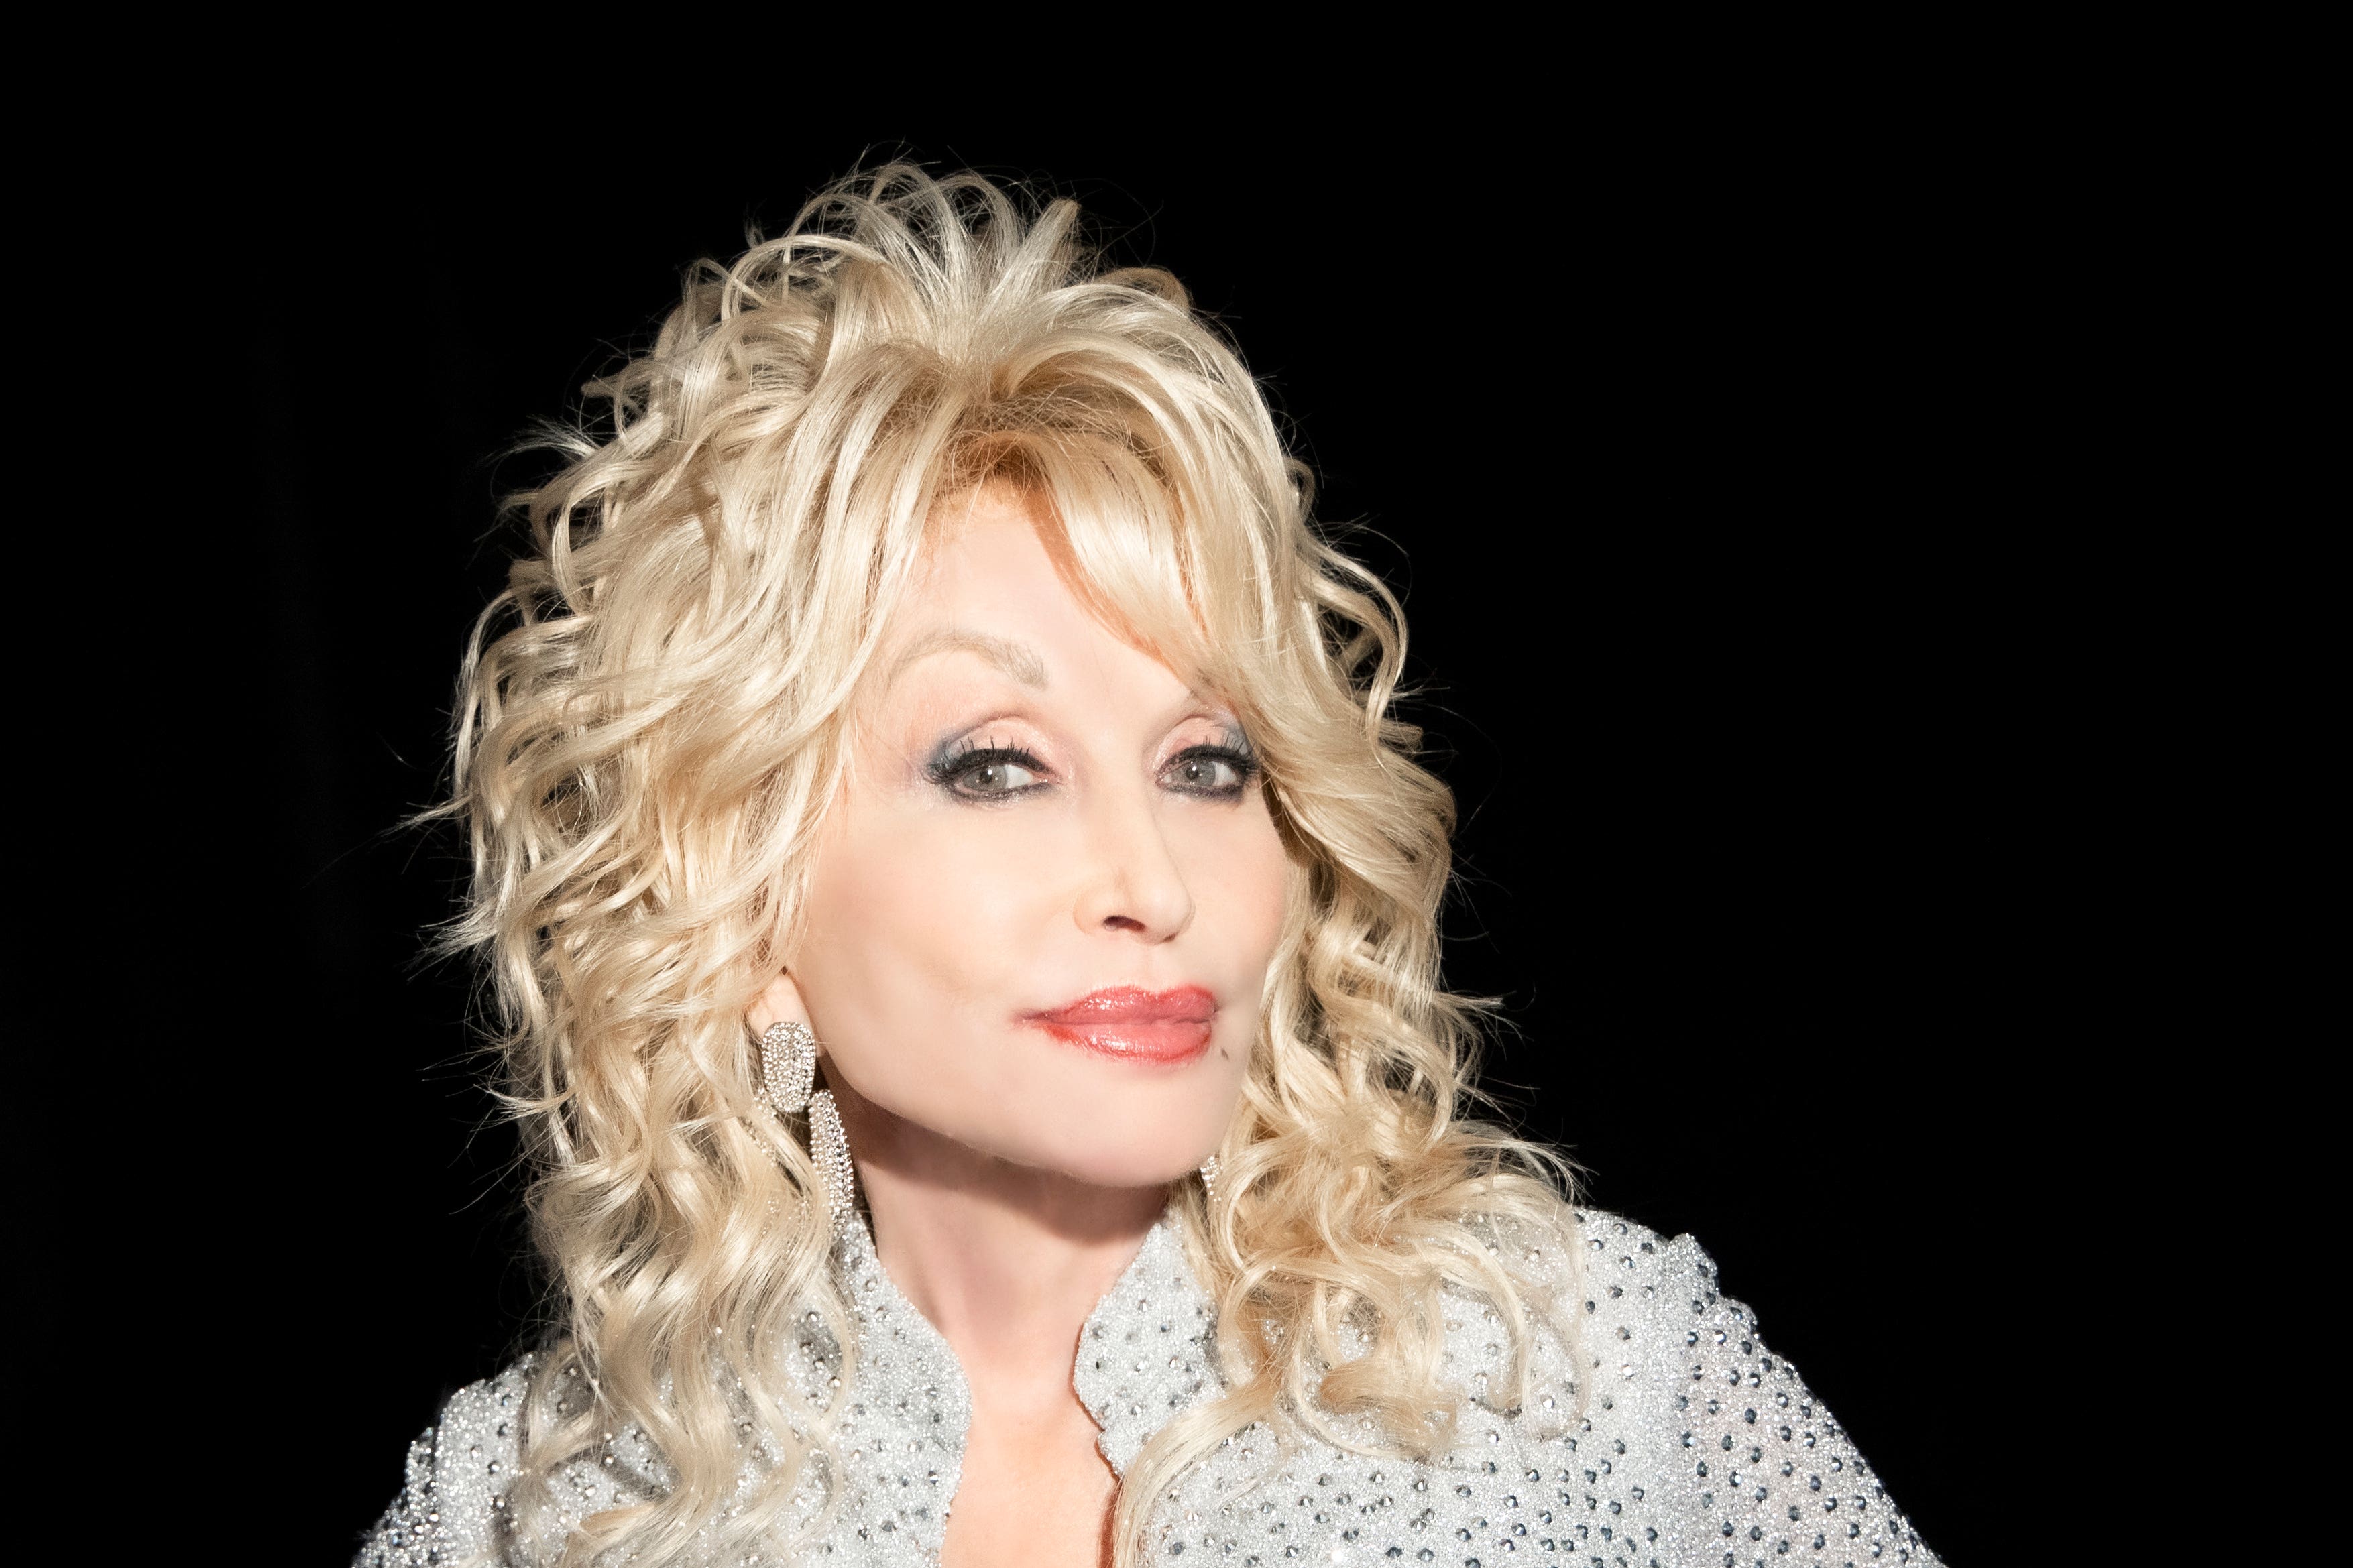 Dolly Parton Says She Has No Plans to Retire Anytime Soon